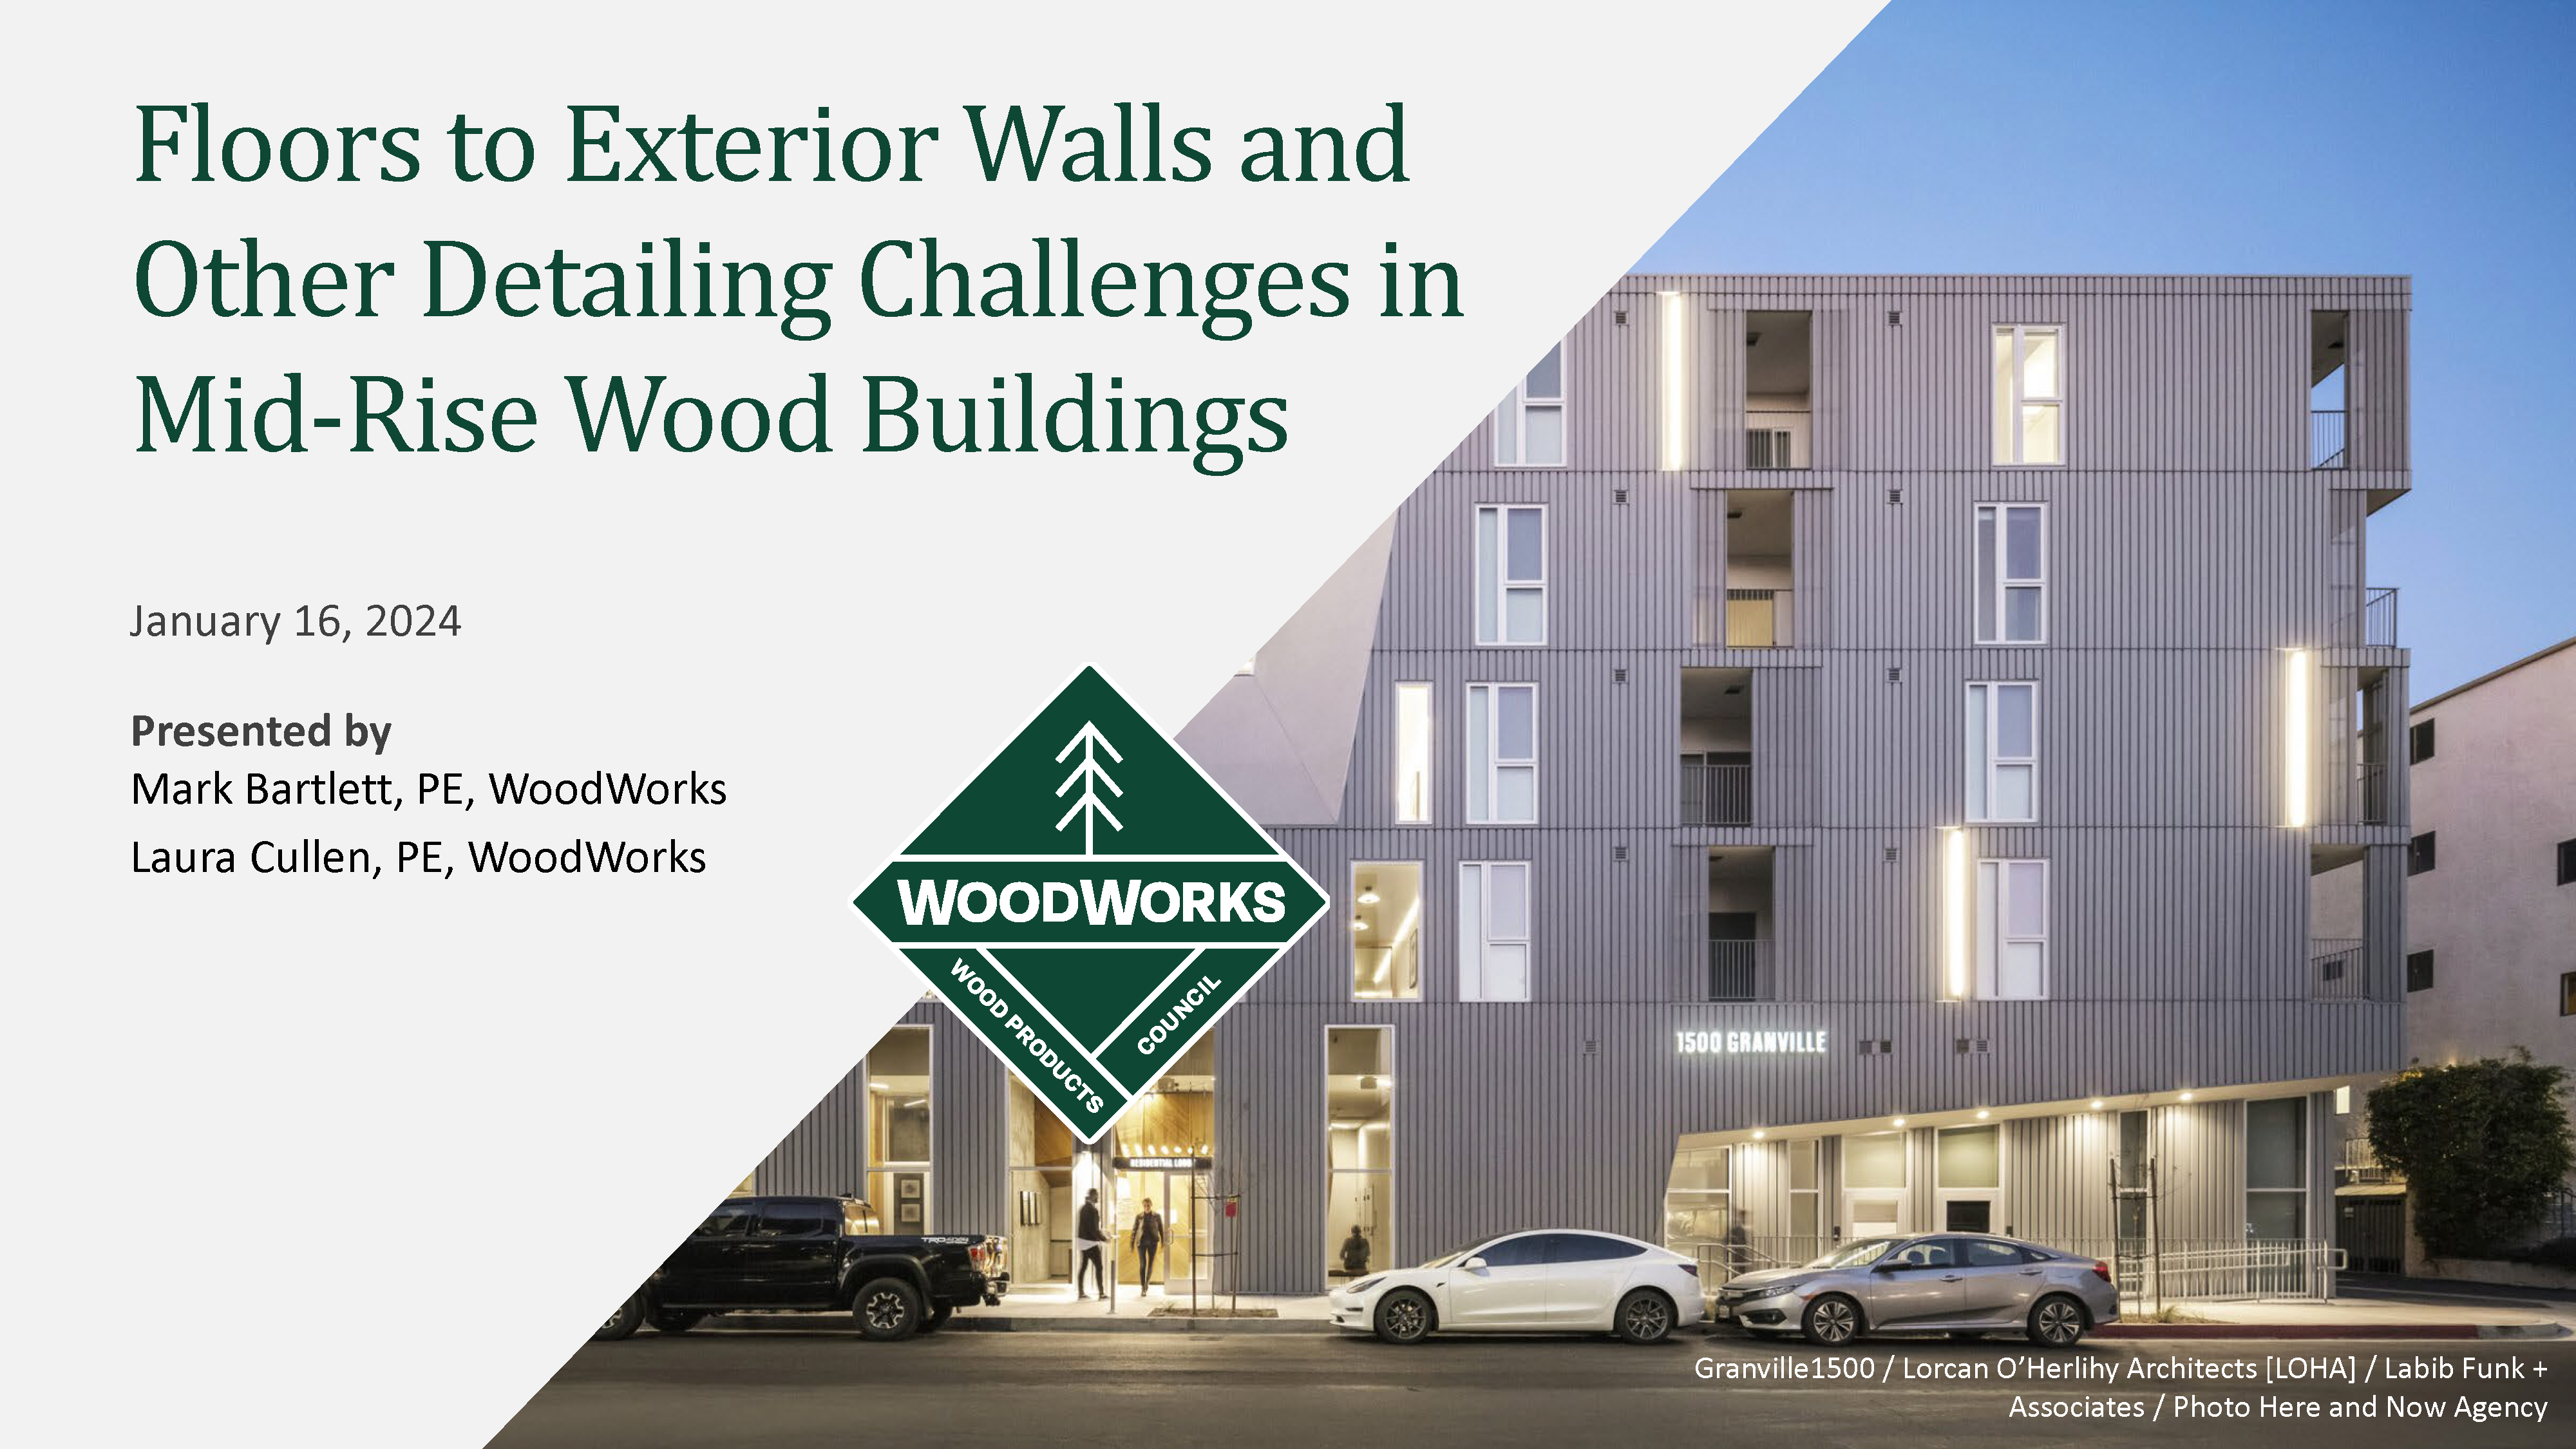 Floors to Exterior Walls and Other Detailing Challenges in Mid-Rise Wood Buildings